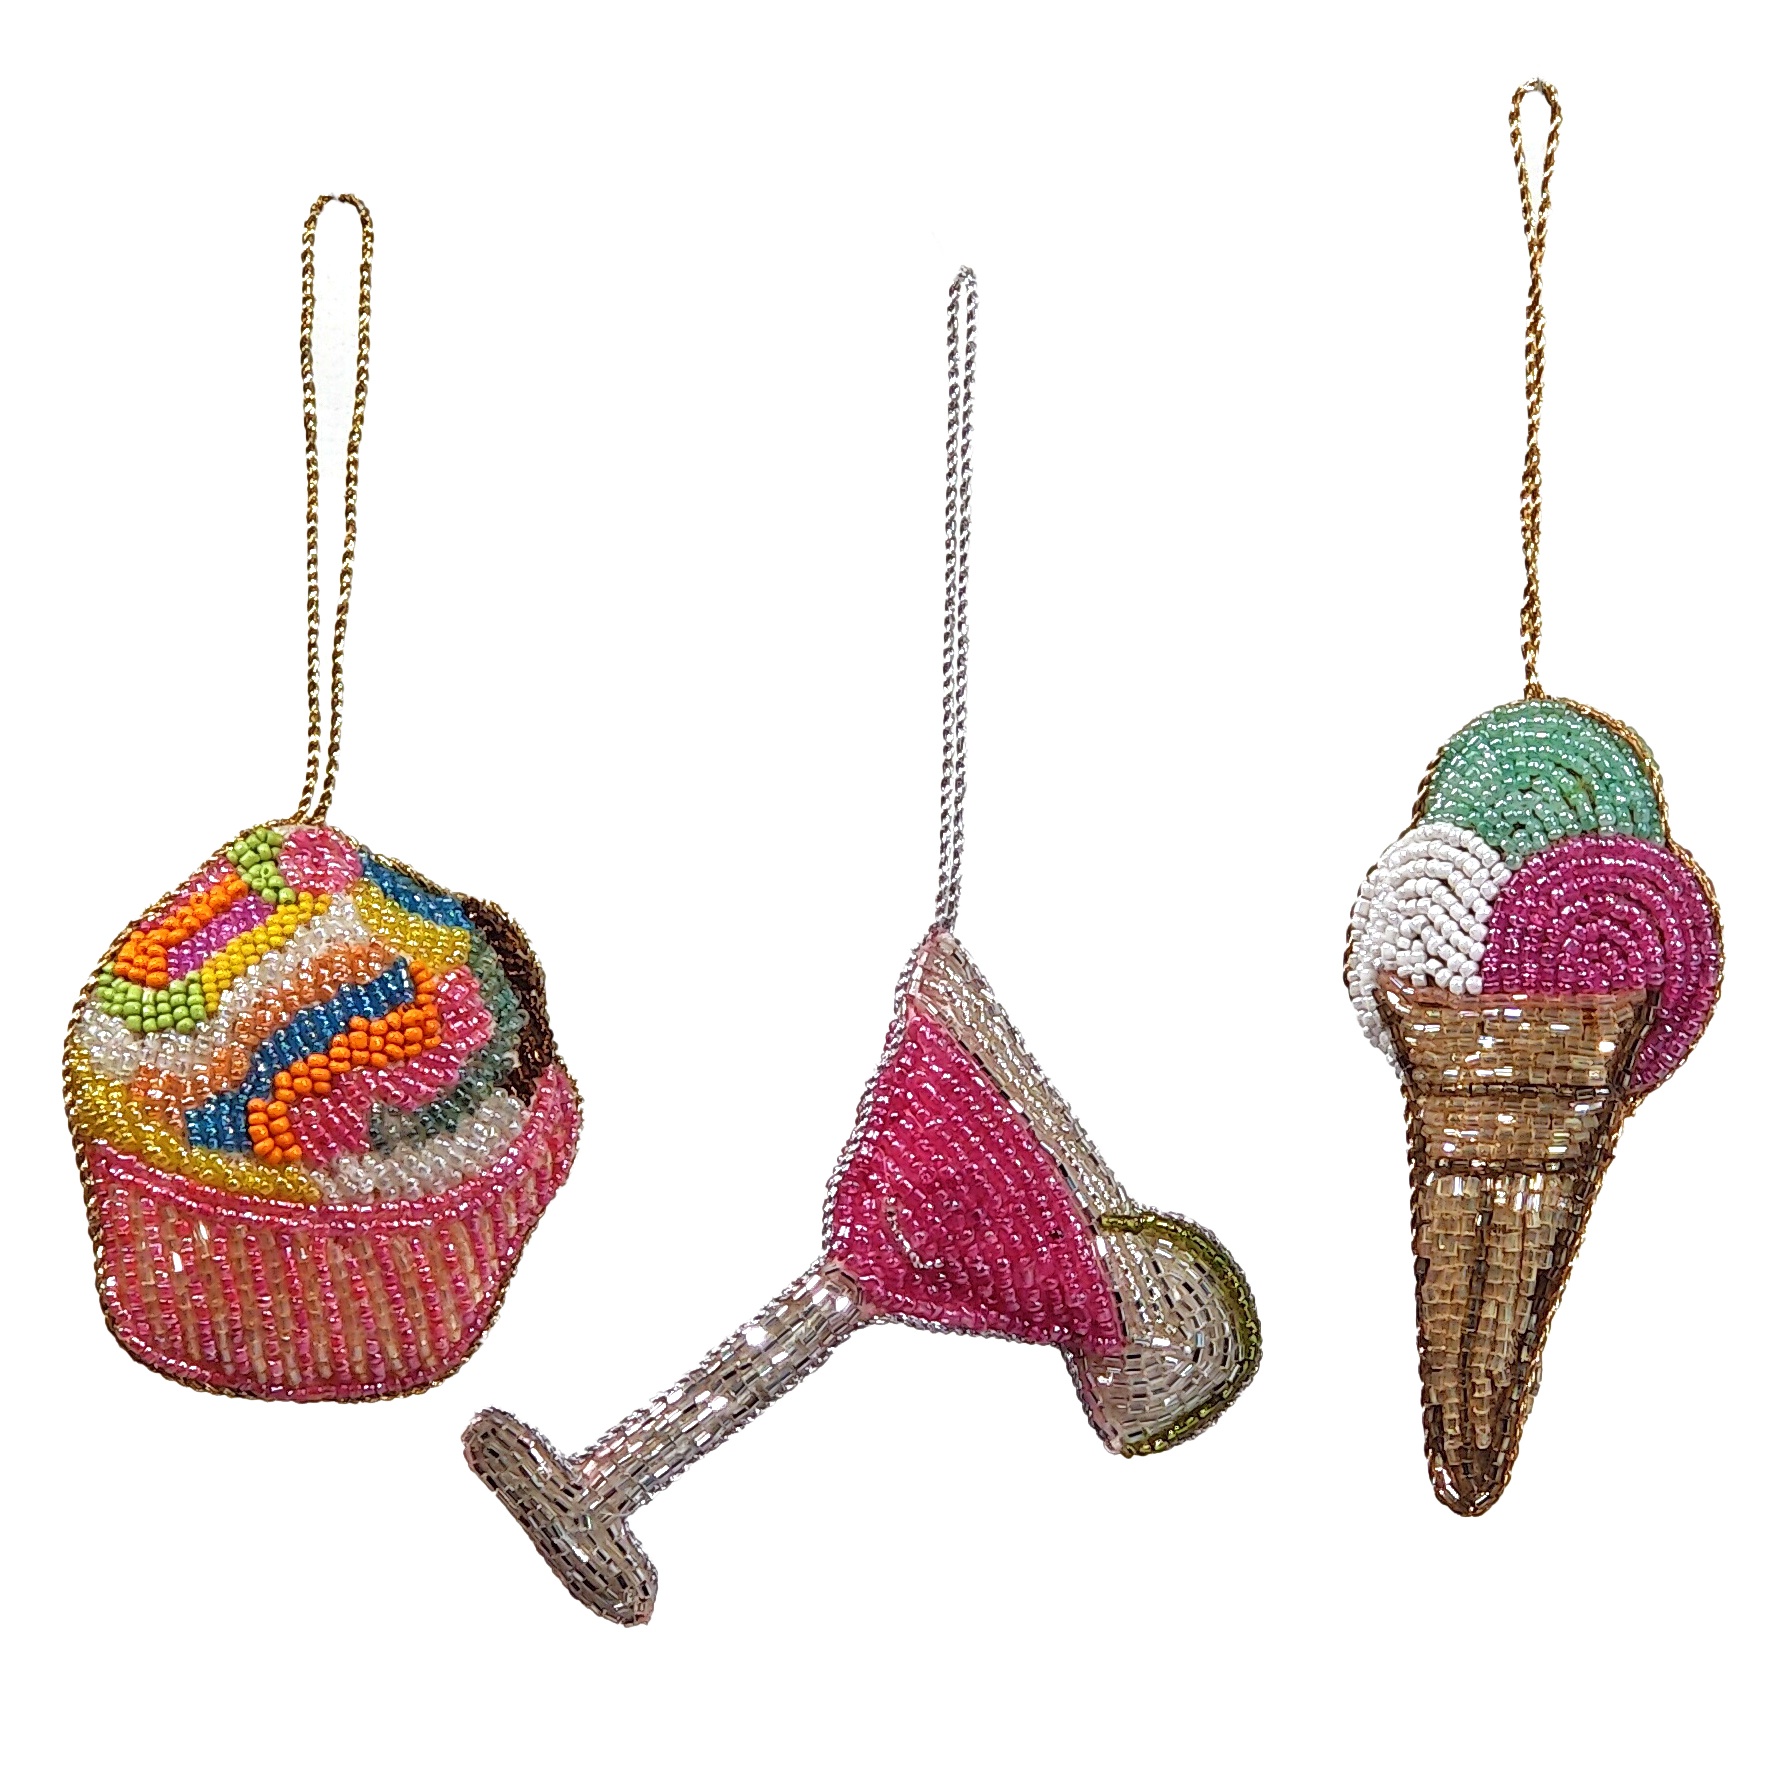 Felted ice cream cone ornaments set of 3